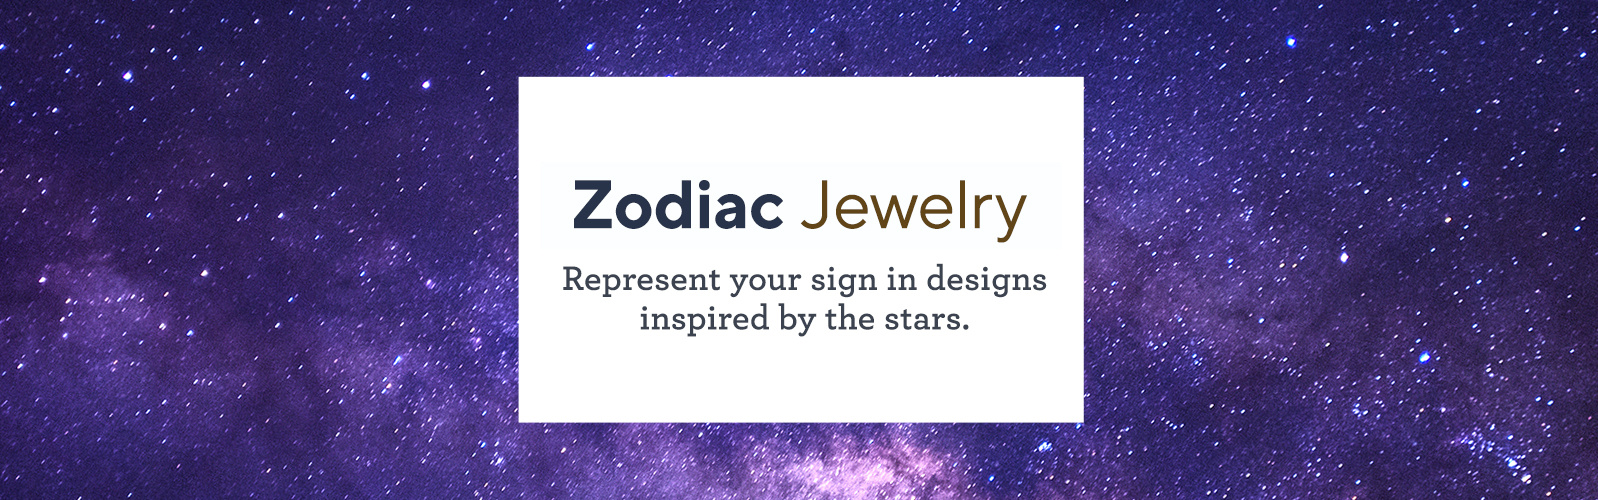 Zodiac Jewelry  Represent your sign in designs inspired by the stars.